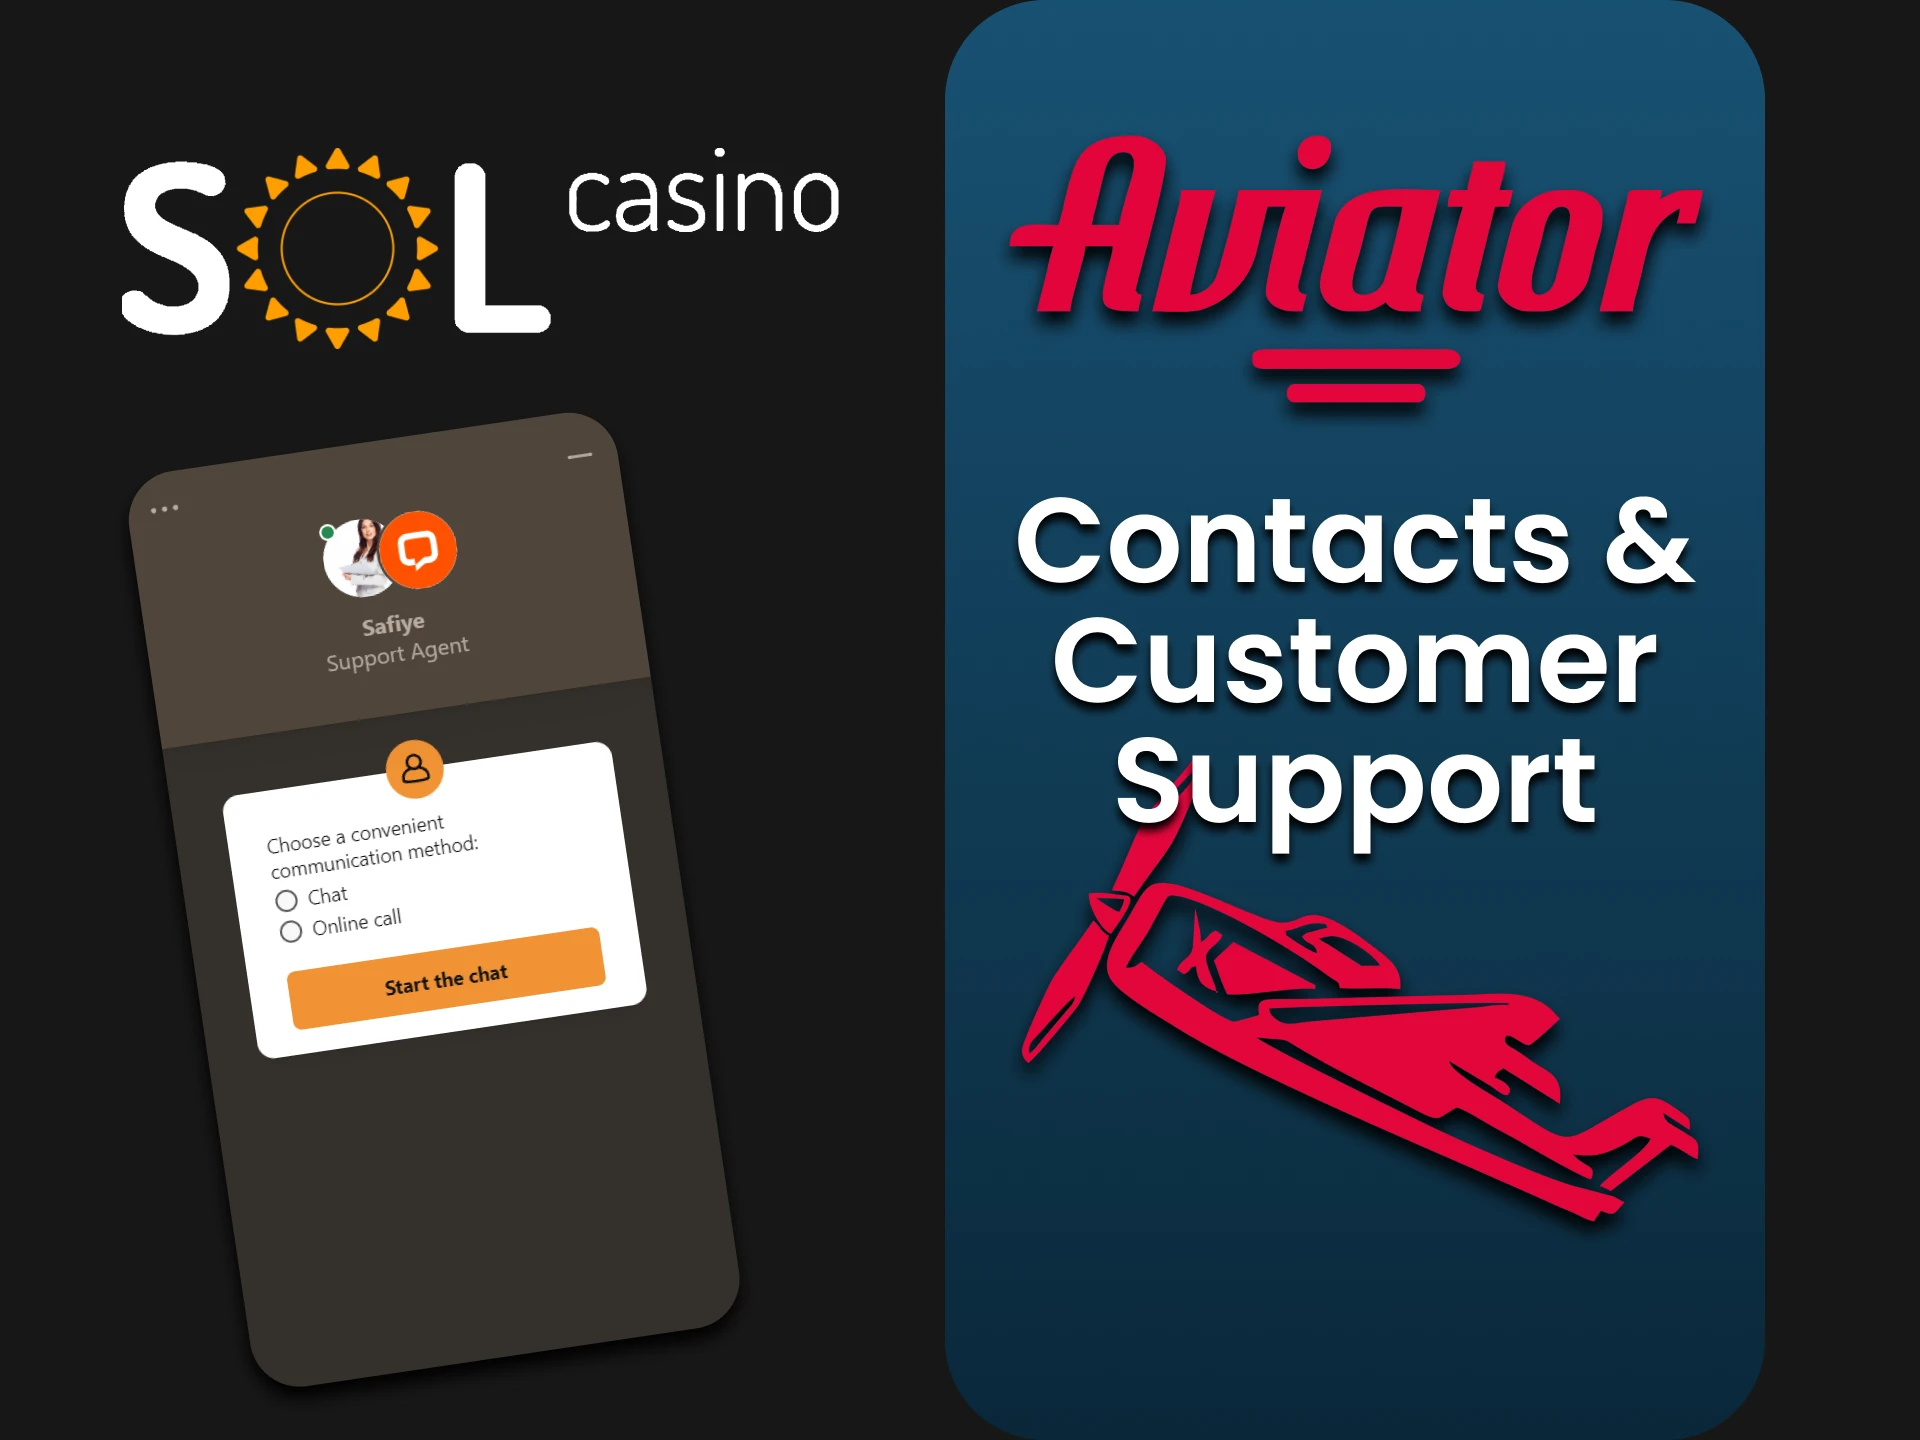 We will tell you how to contact the support team at Sol Casino for the Aviator game.